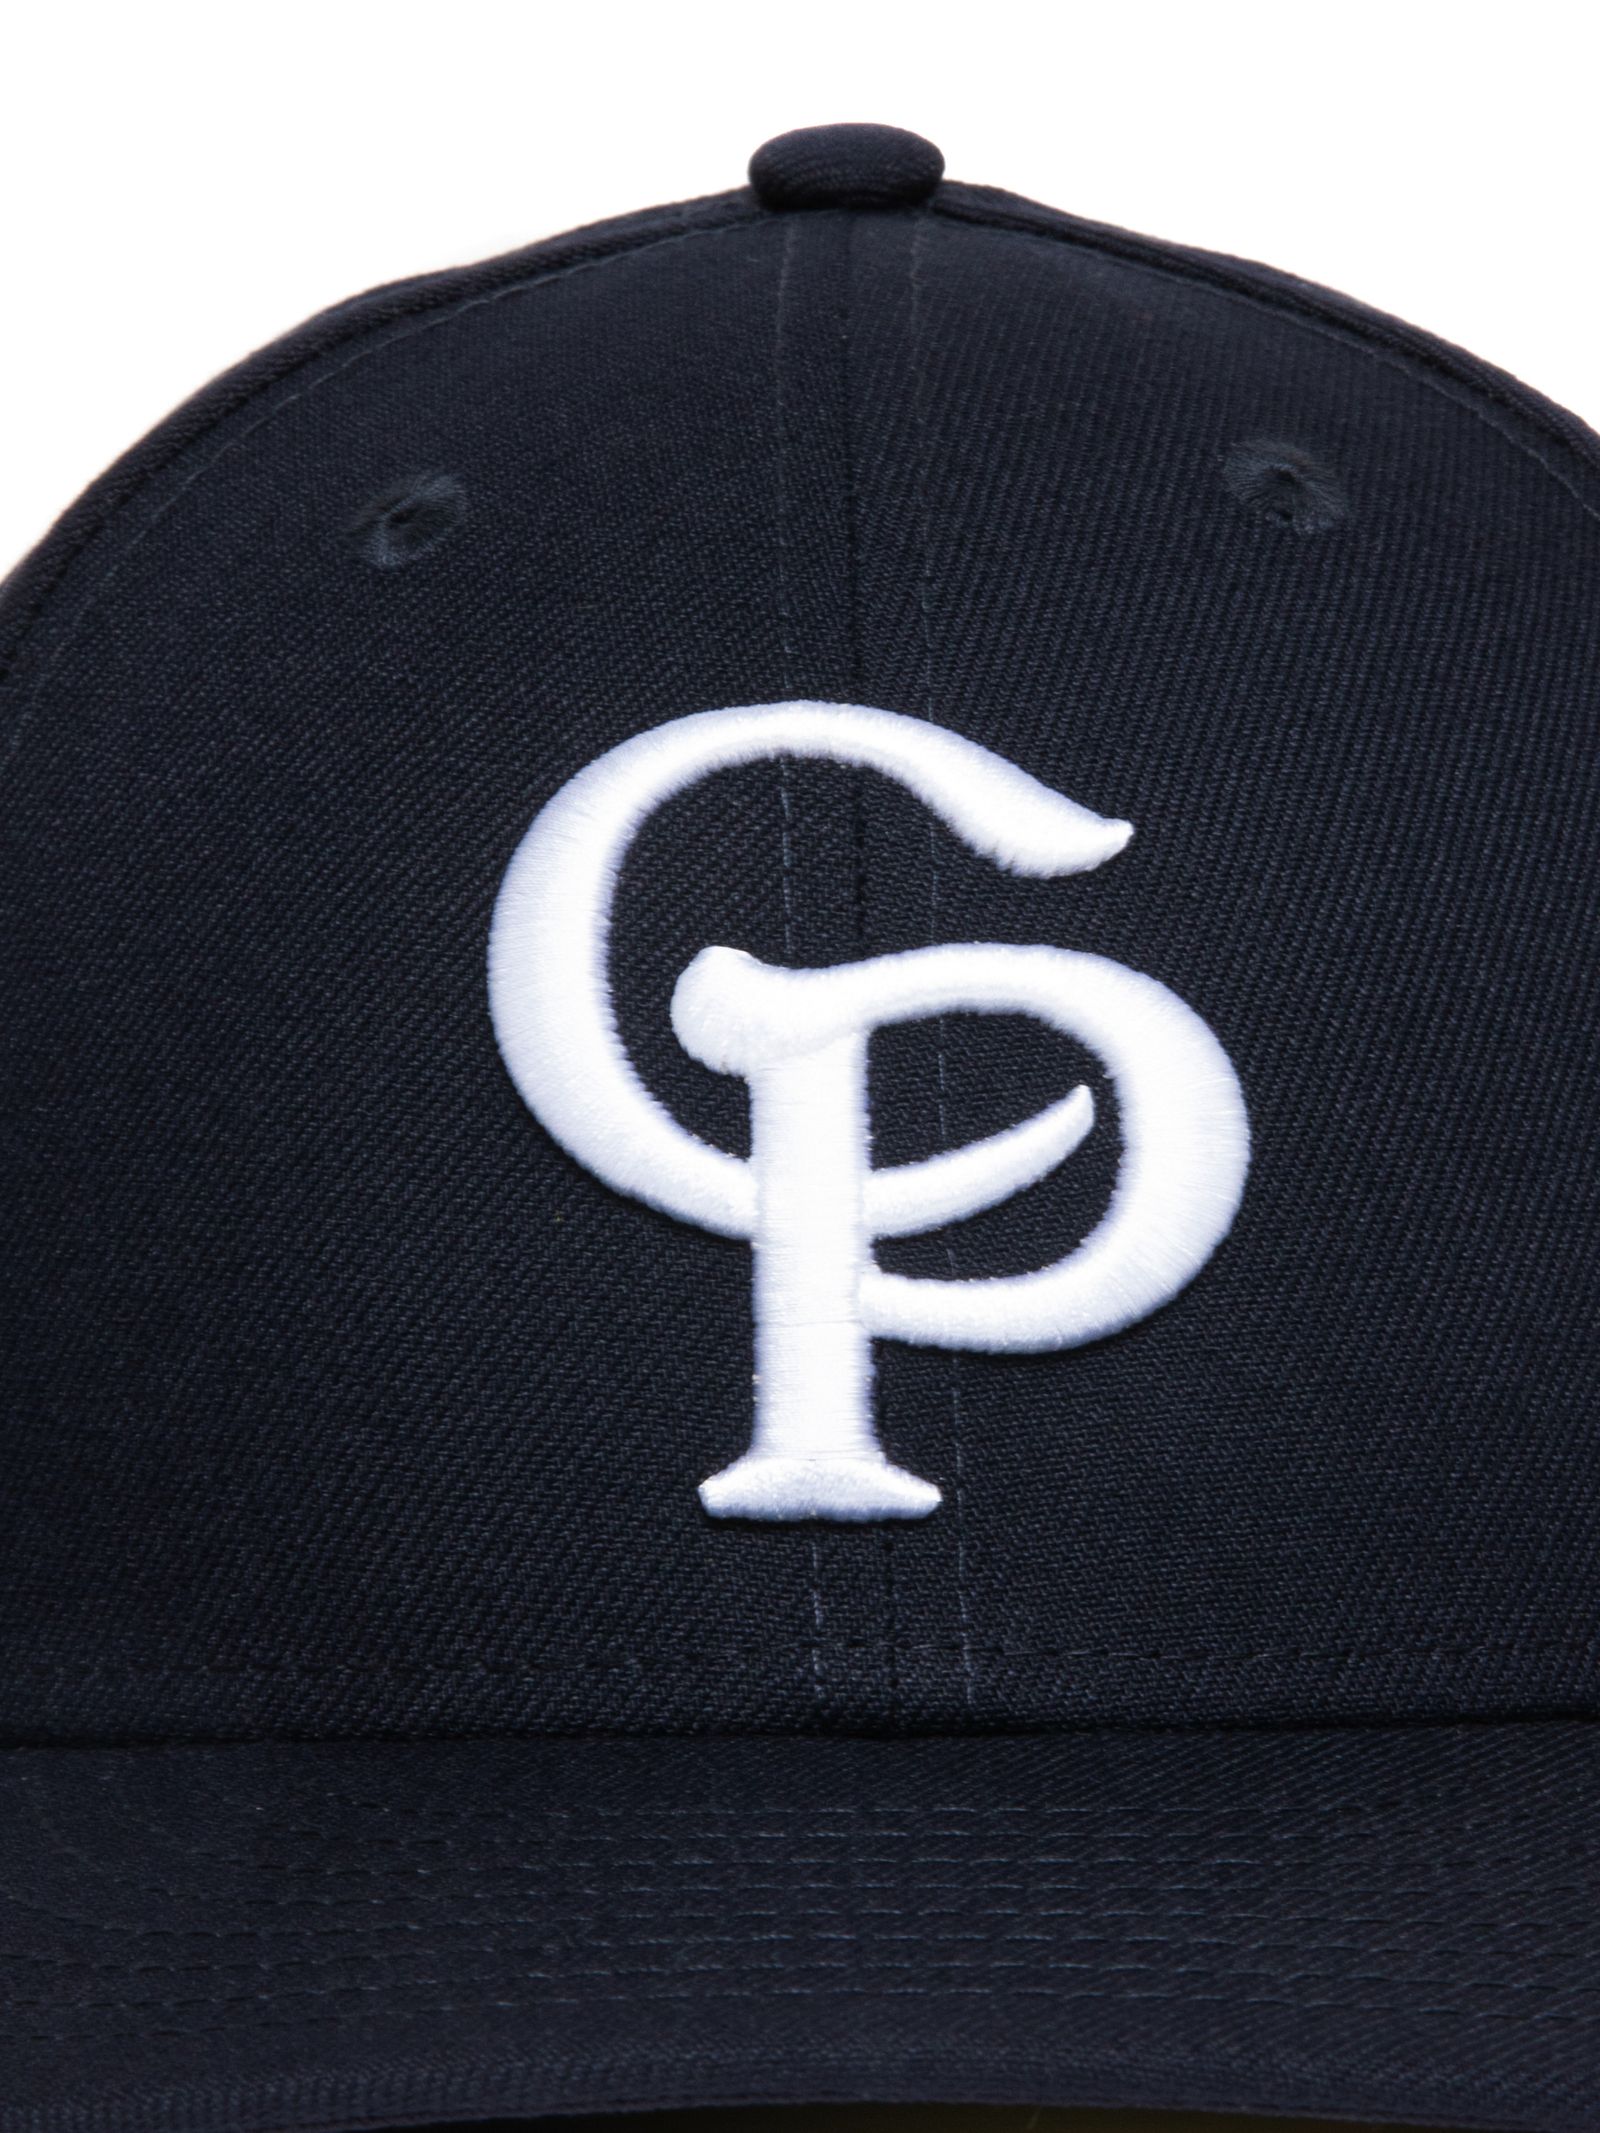 COOTIE PRODUCTIONS - Low Profile 59FIFTY (NAVY) / ニューエラ ...